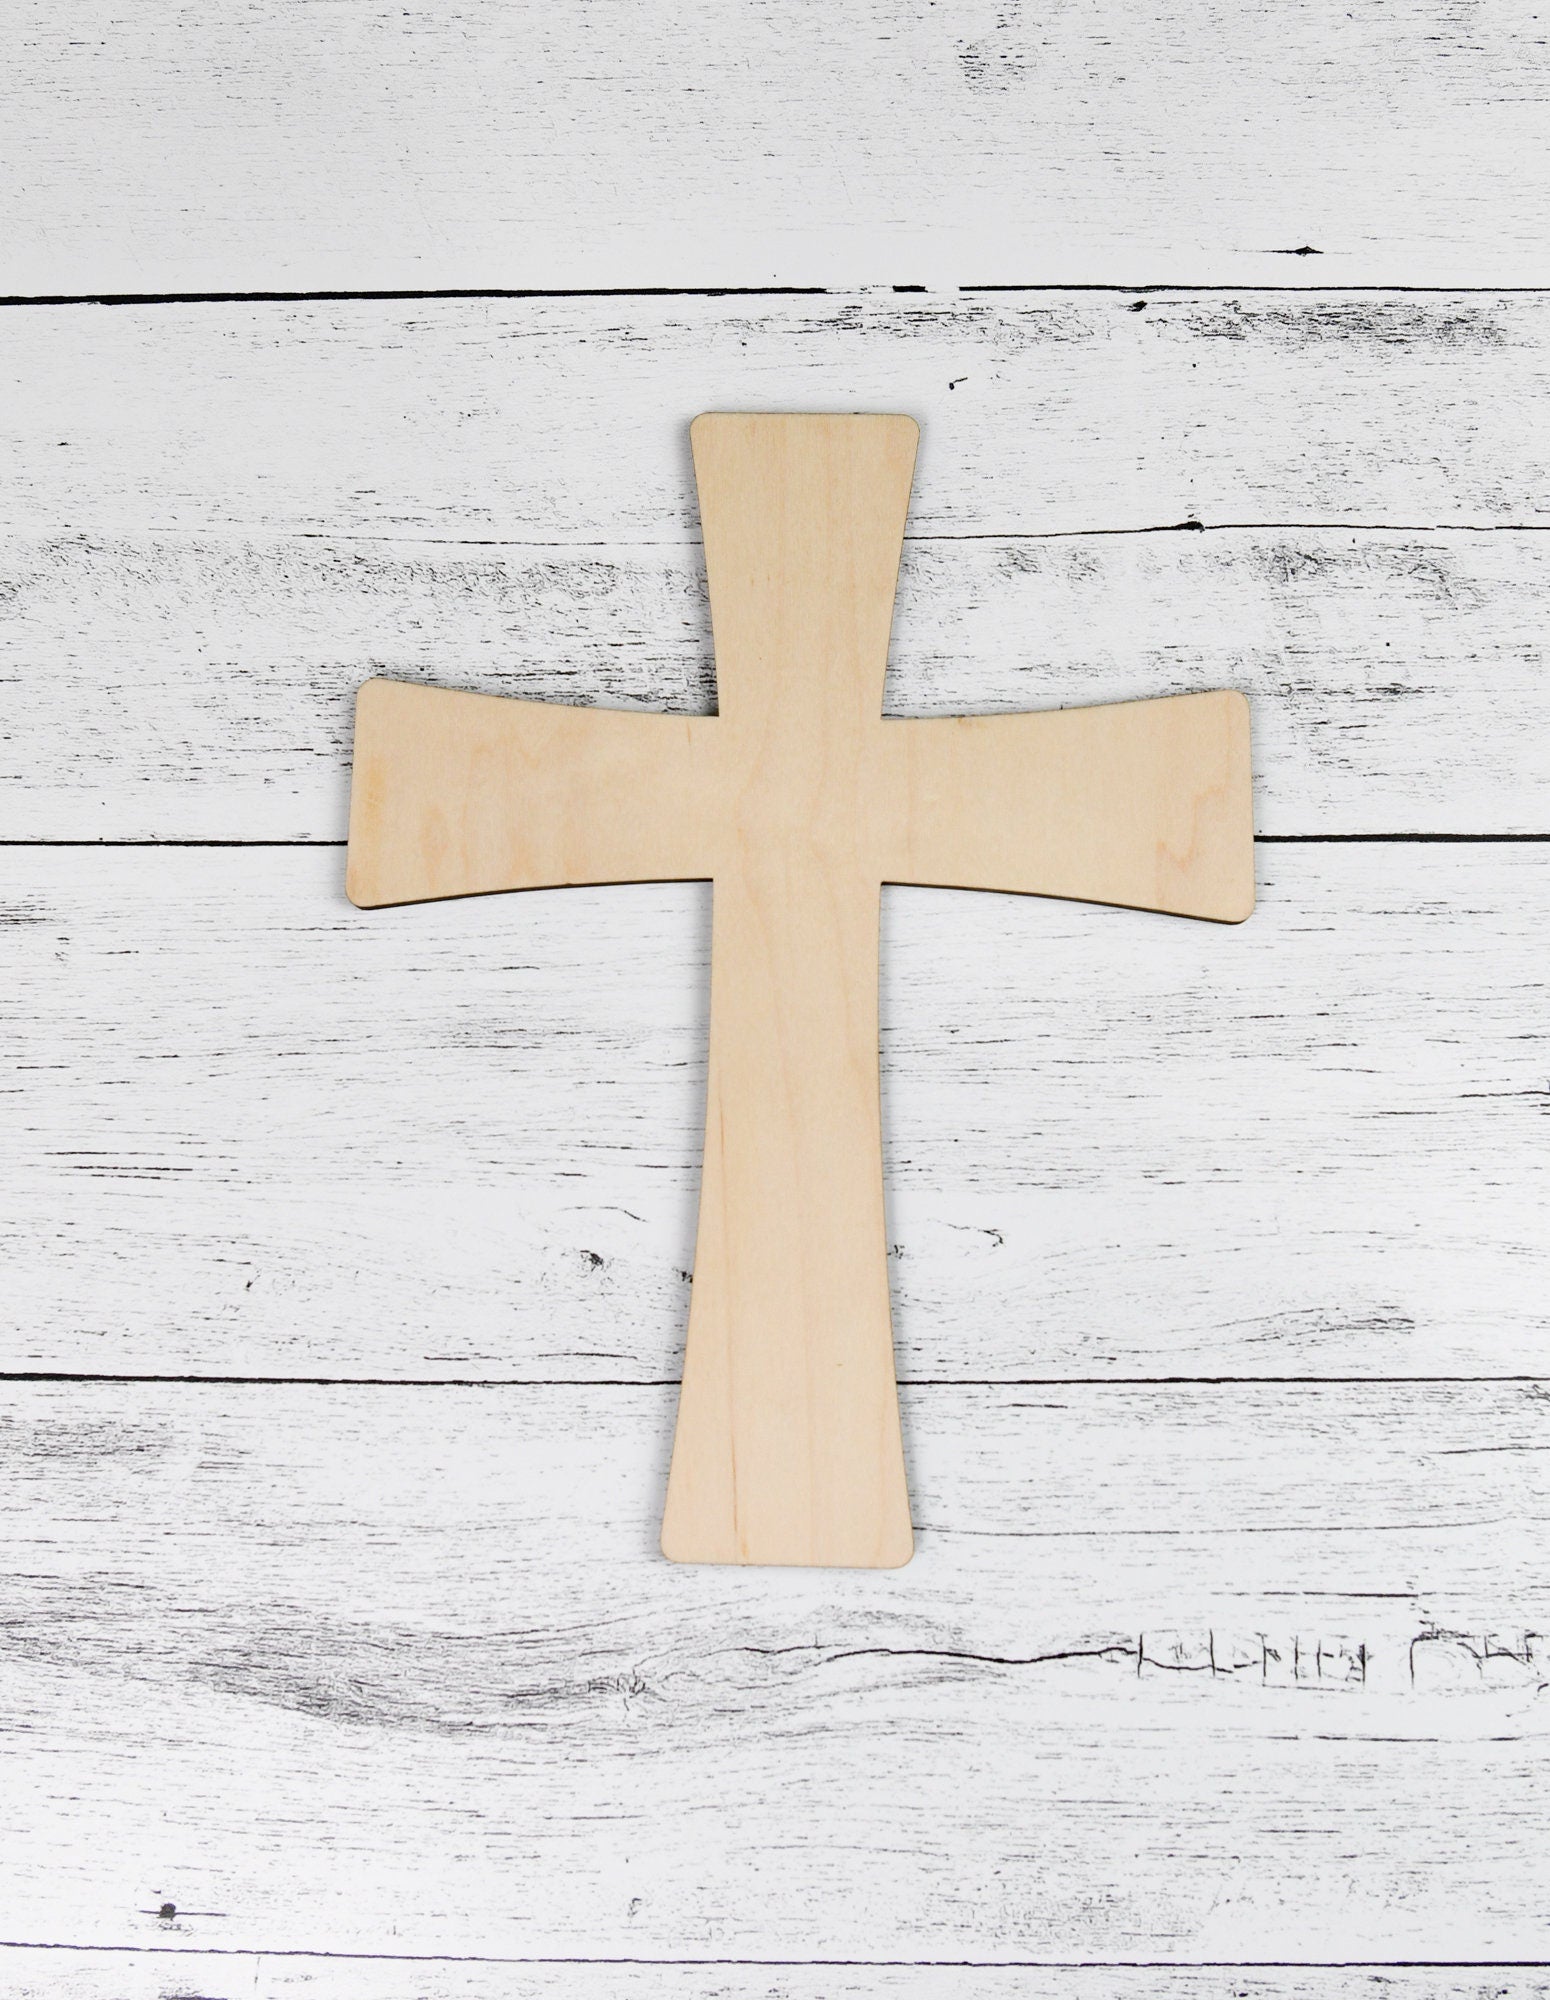 Wood Cross, Wooden cross for crafts, Religious Decor, Christian decorations, Worship, Unfinished DIY, Option To Personalize, Customize it